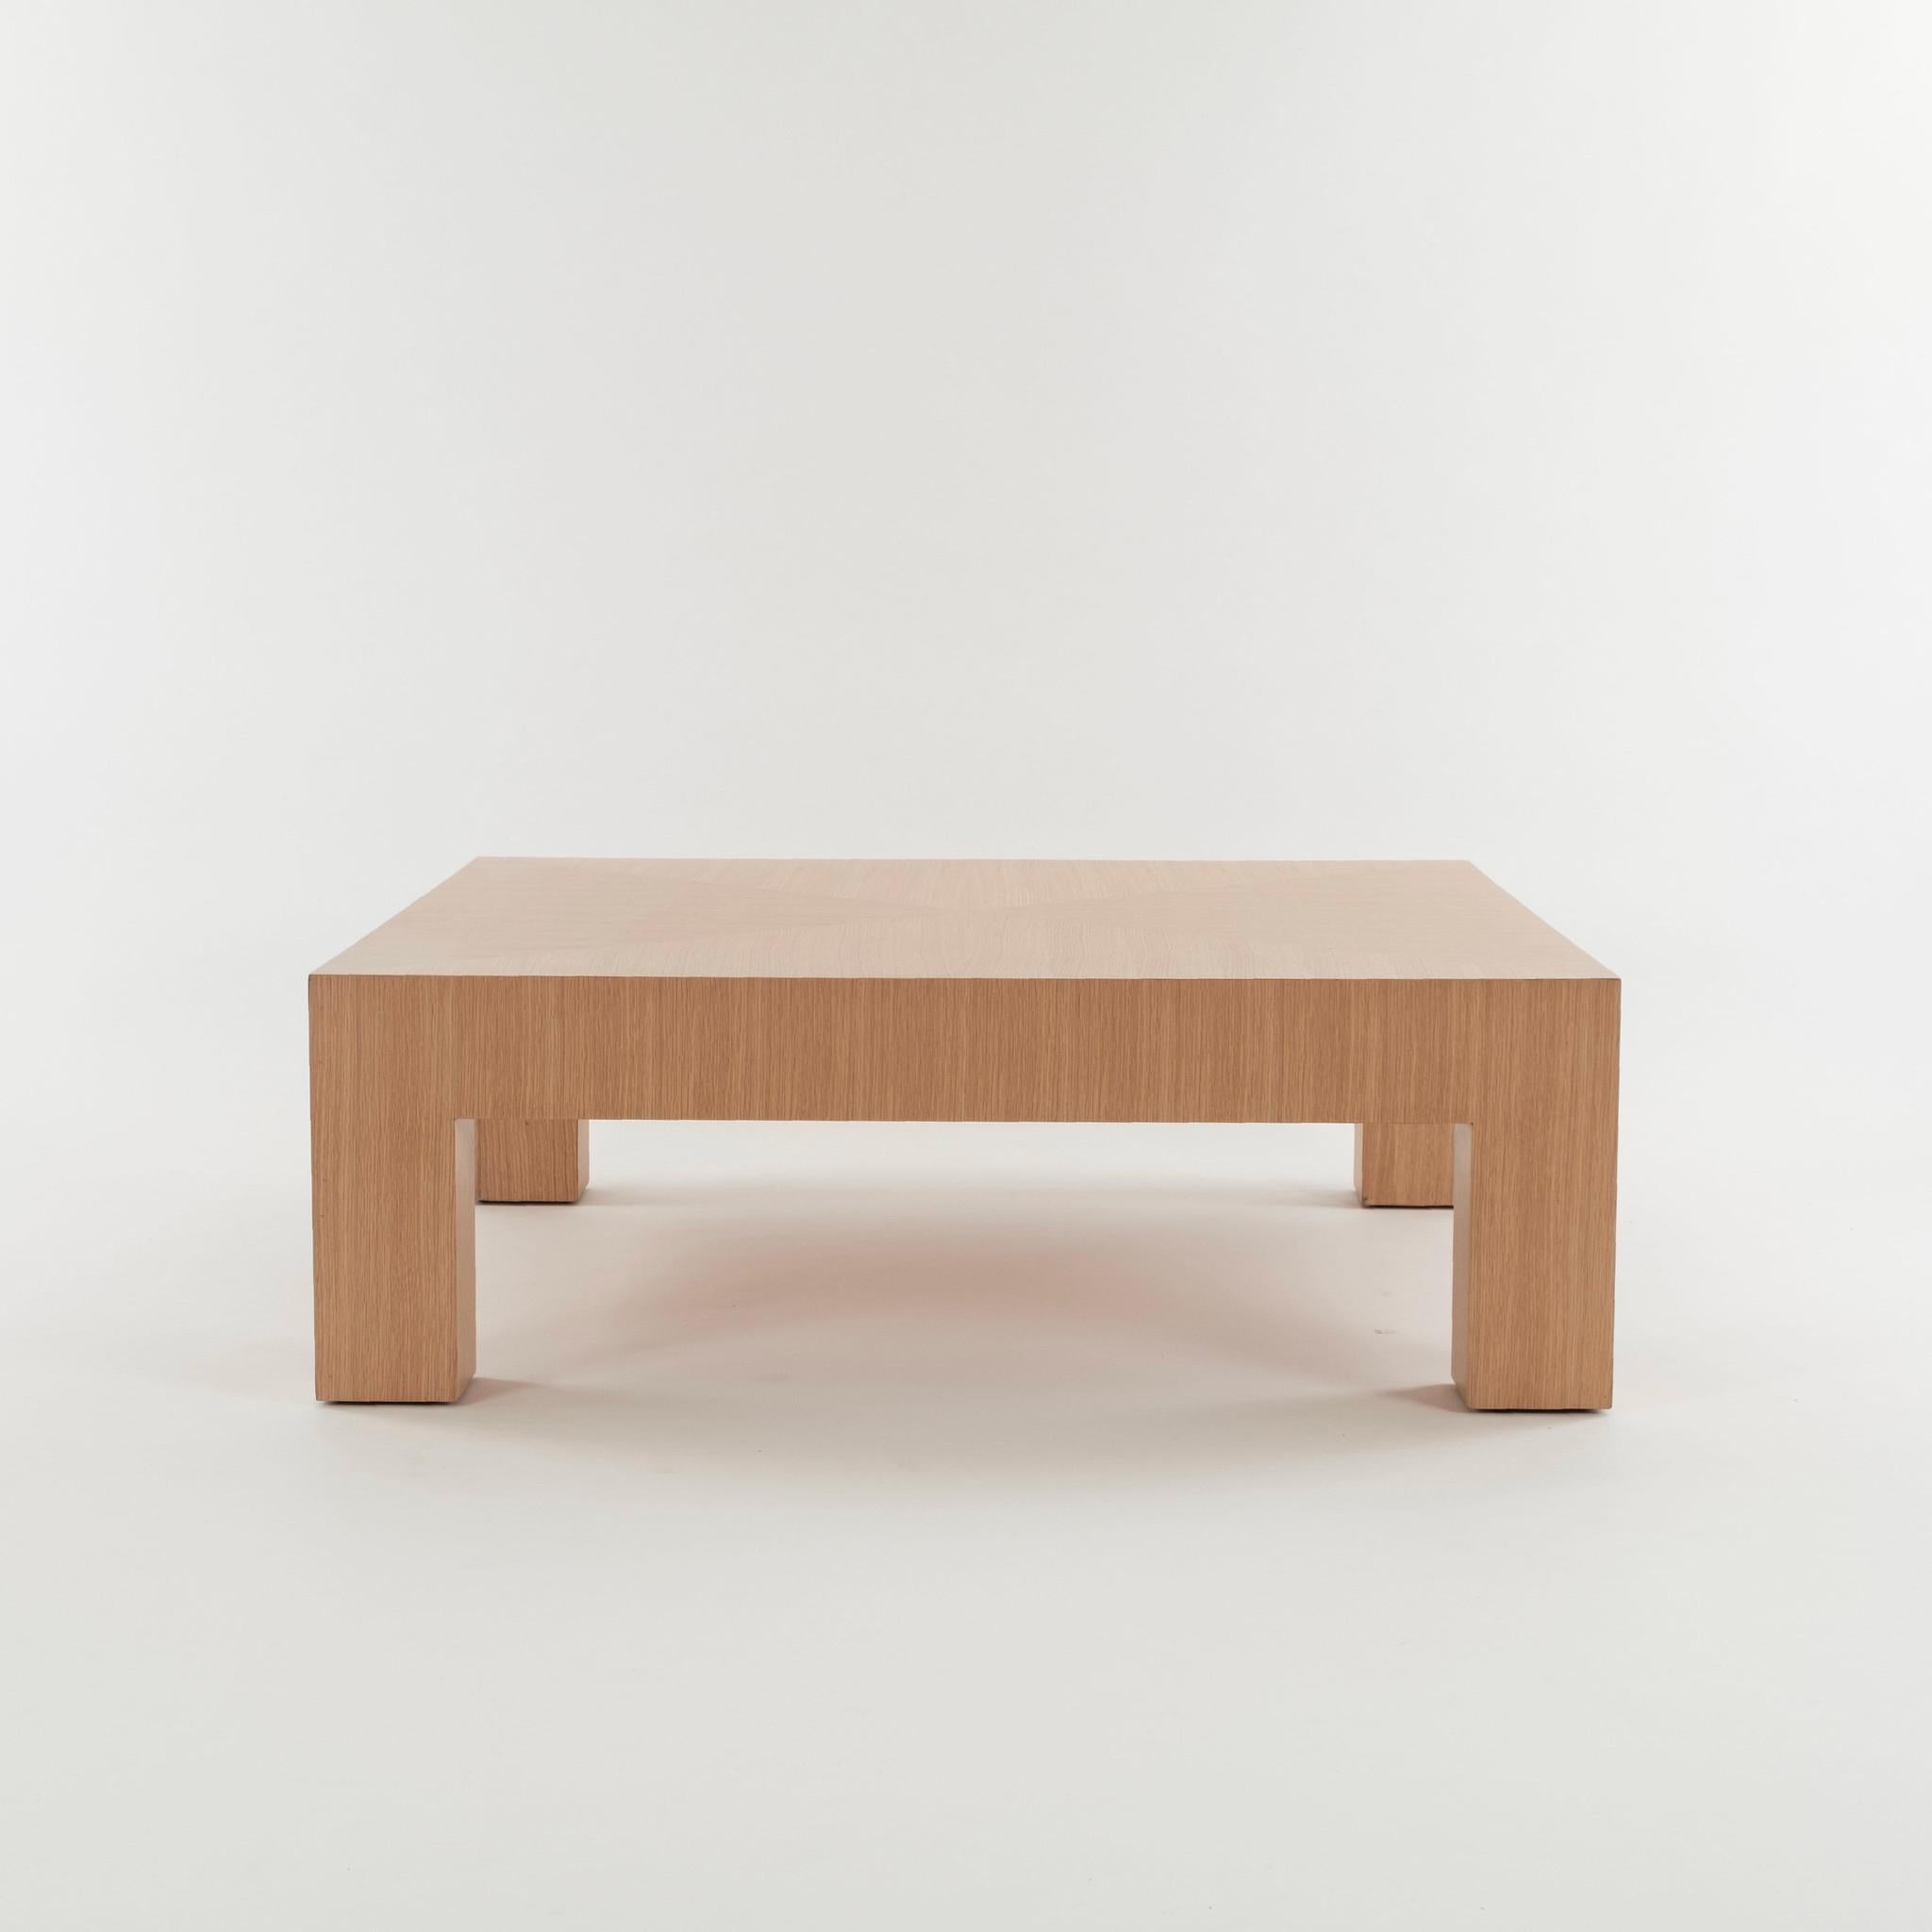 Large Parsons style wood cocktail table with single drawer and finished in natural white oak veneer. Also available in espresso or black.